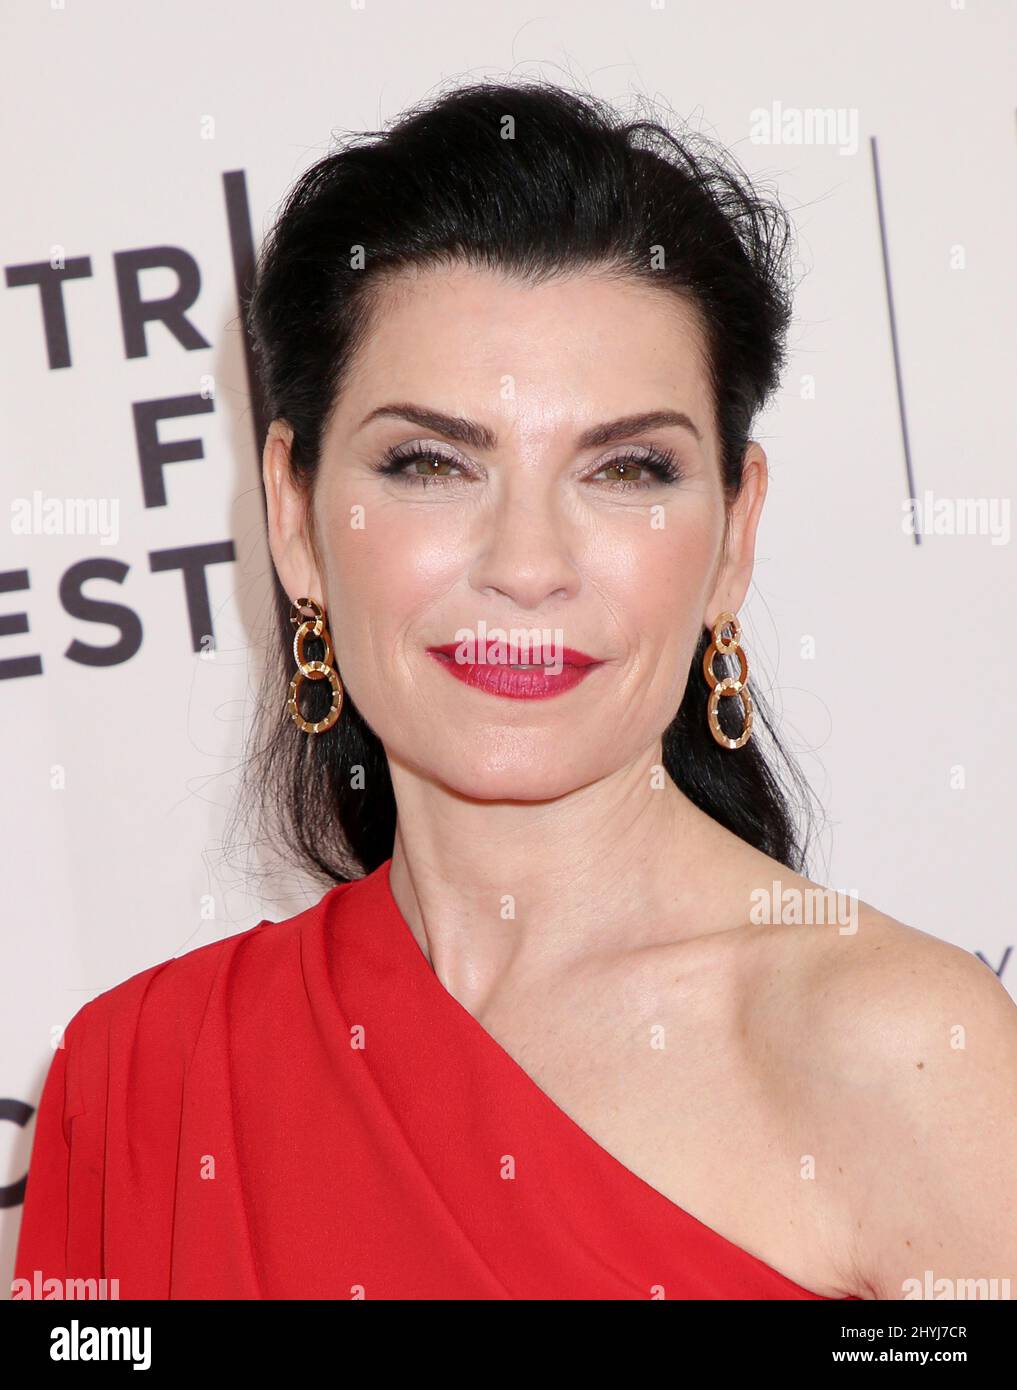 Julianna Margulies attending the 2019 Tribeca Film Festival 'The Hot Zone' Premiere held at the SVA Theater on April 30, 2019 in New York City, NY Stock Photo